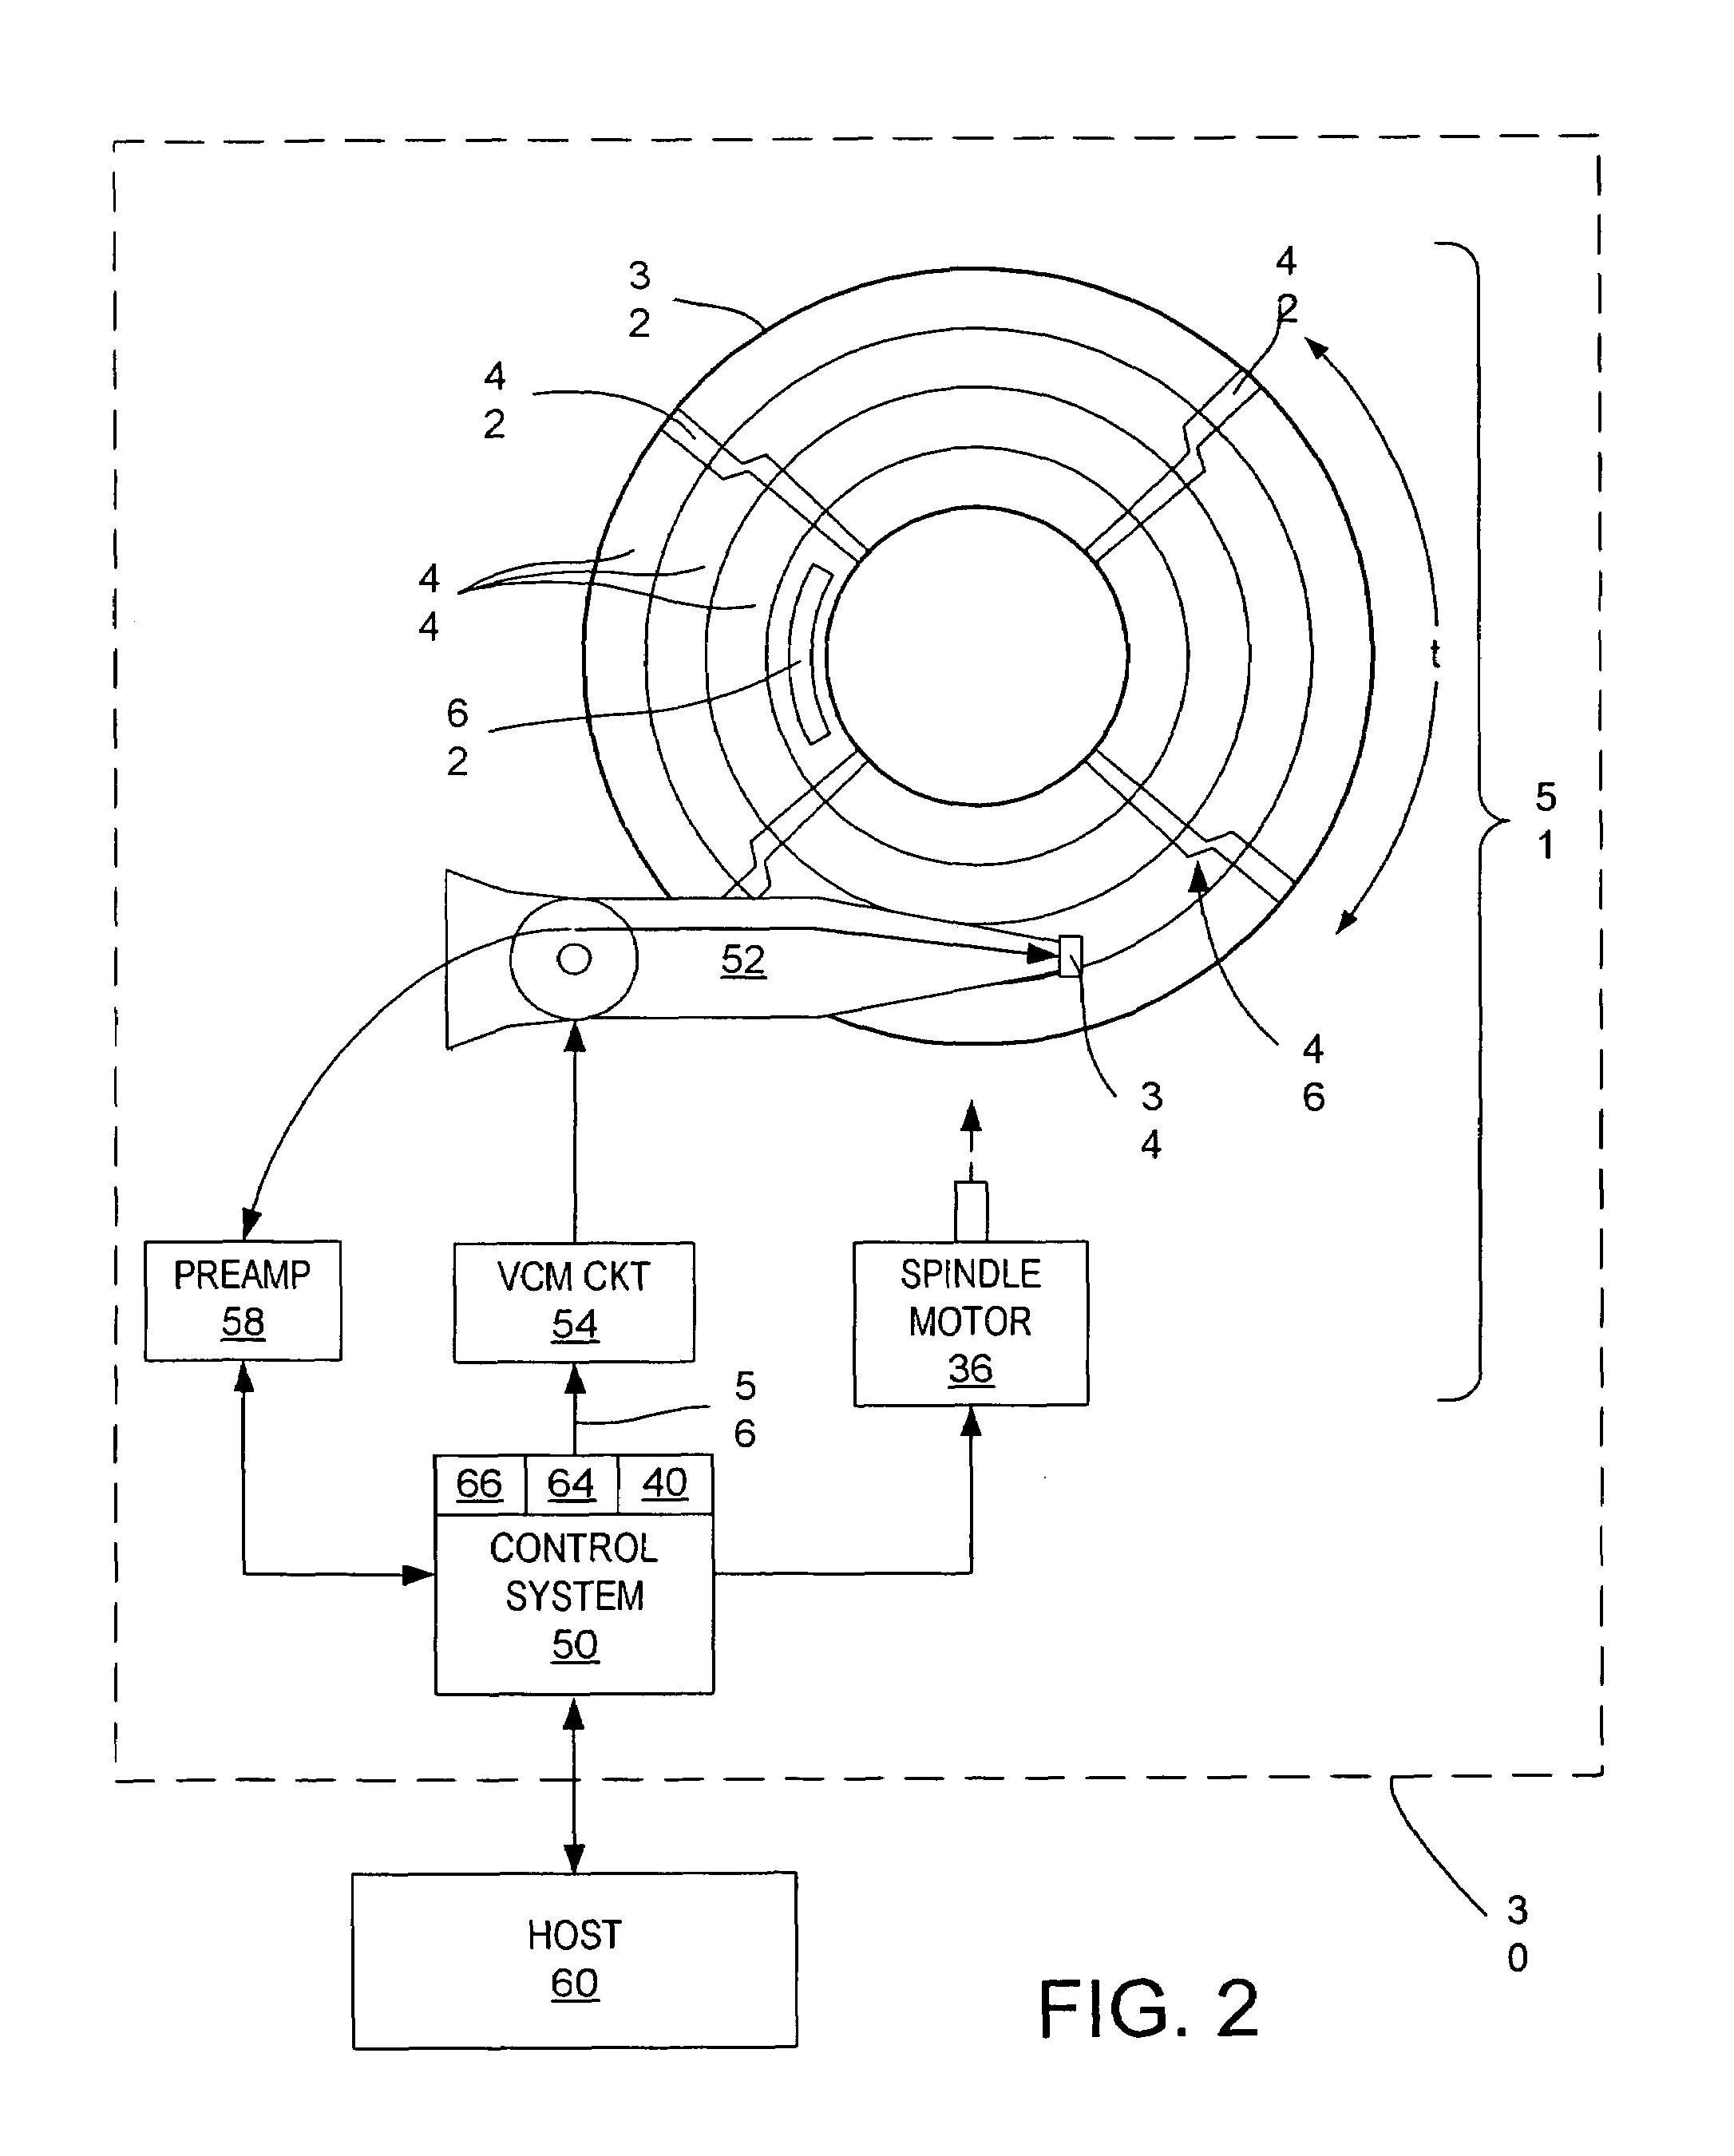 Method for wedge time shift calibration in a disk drive